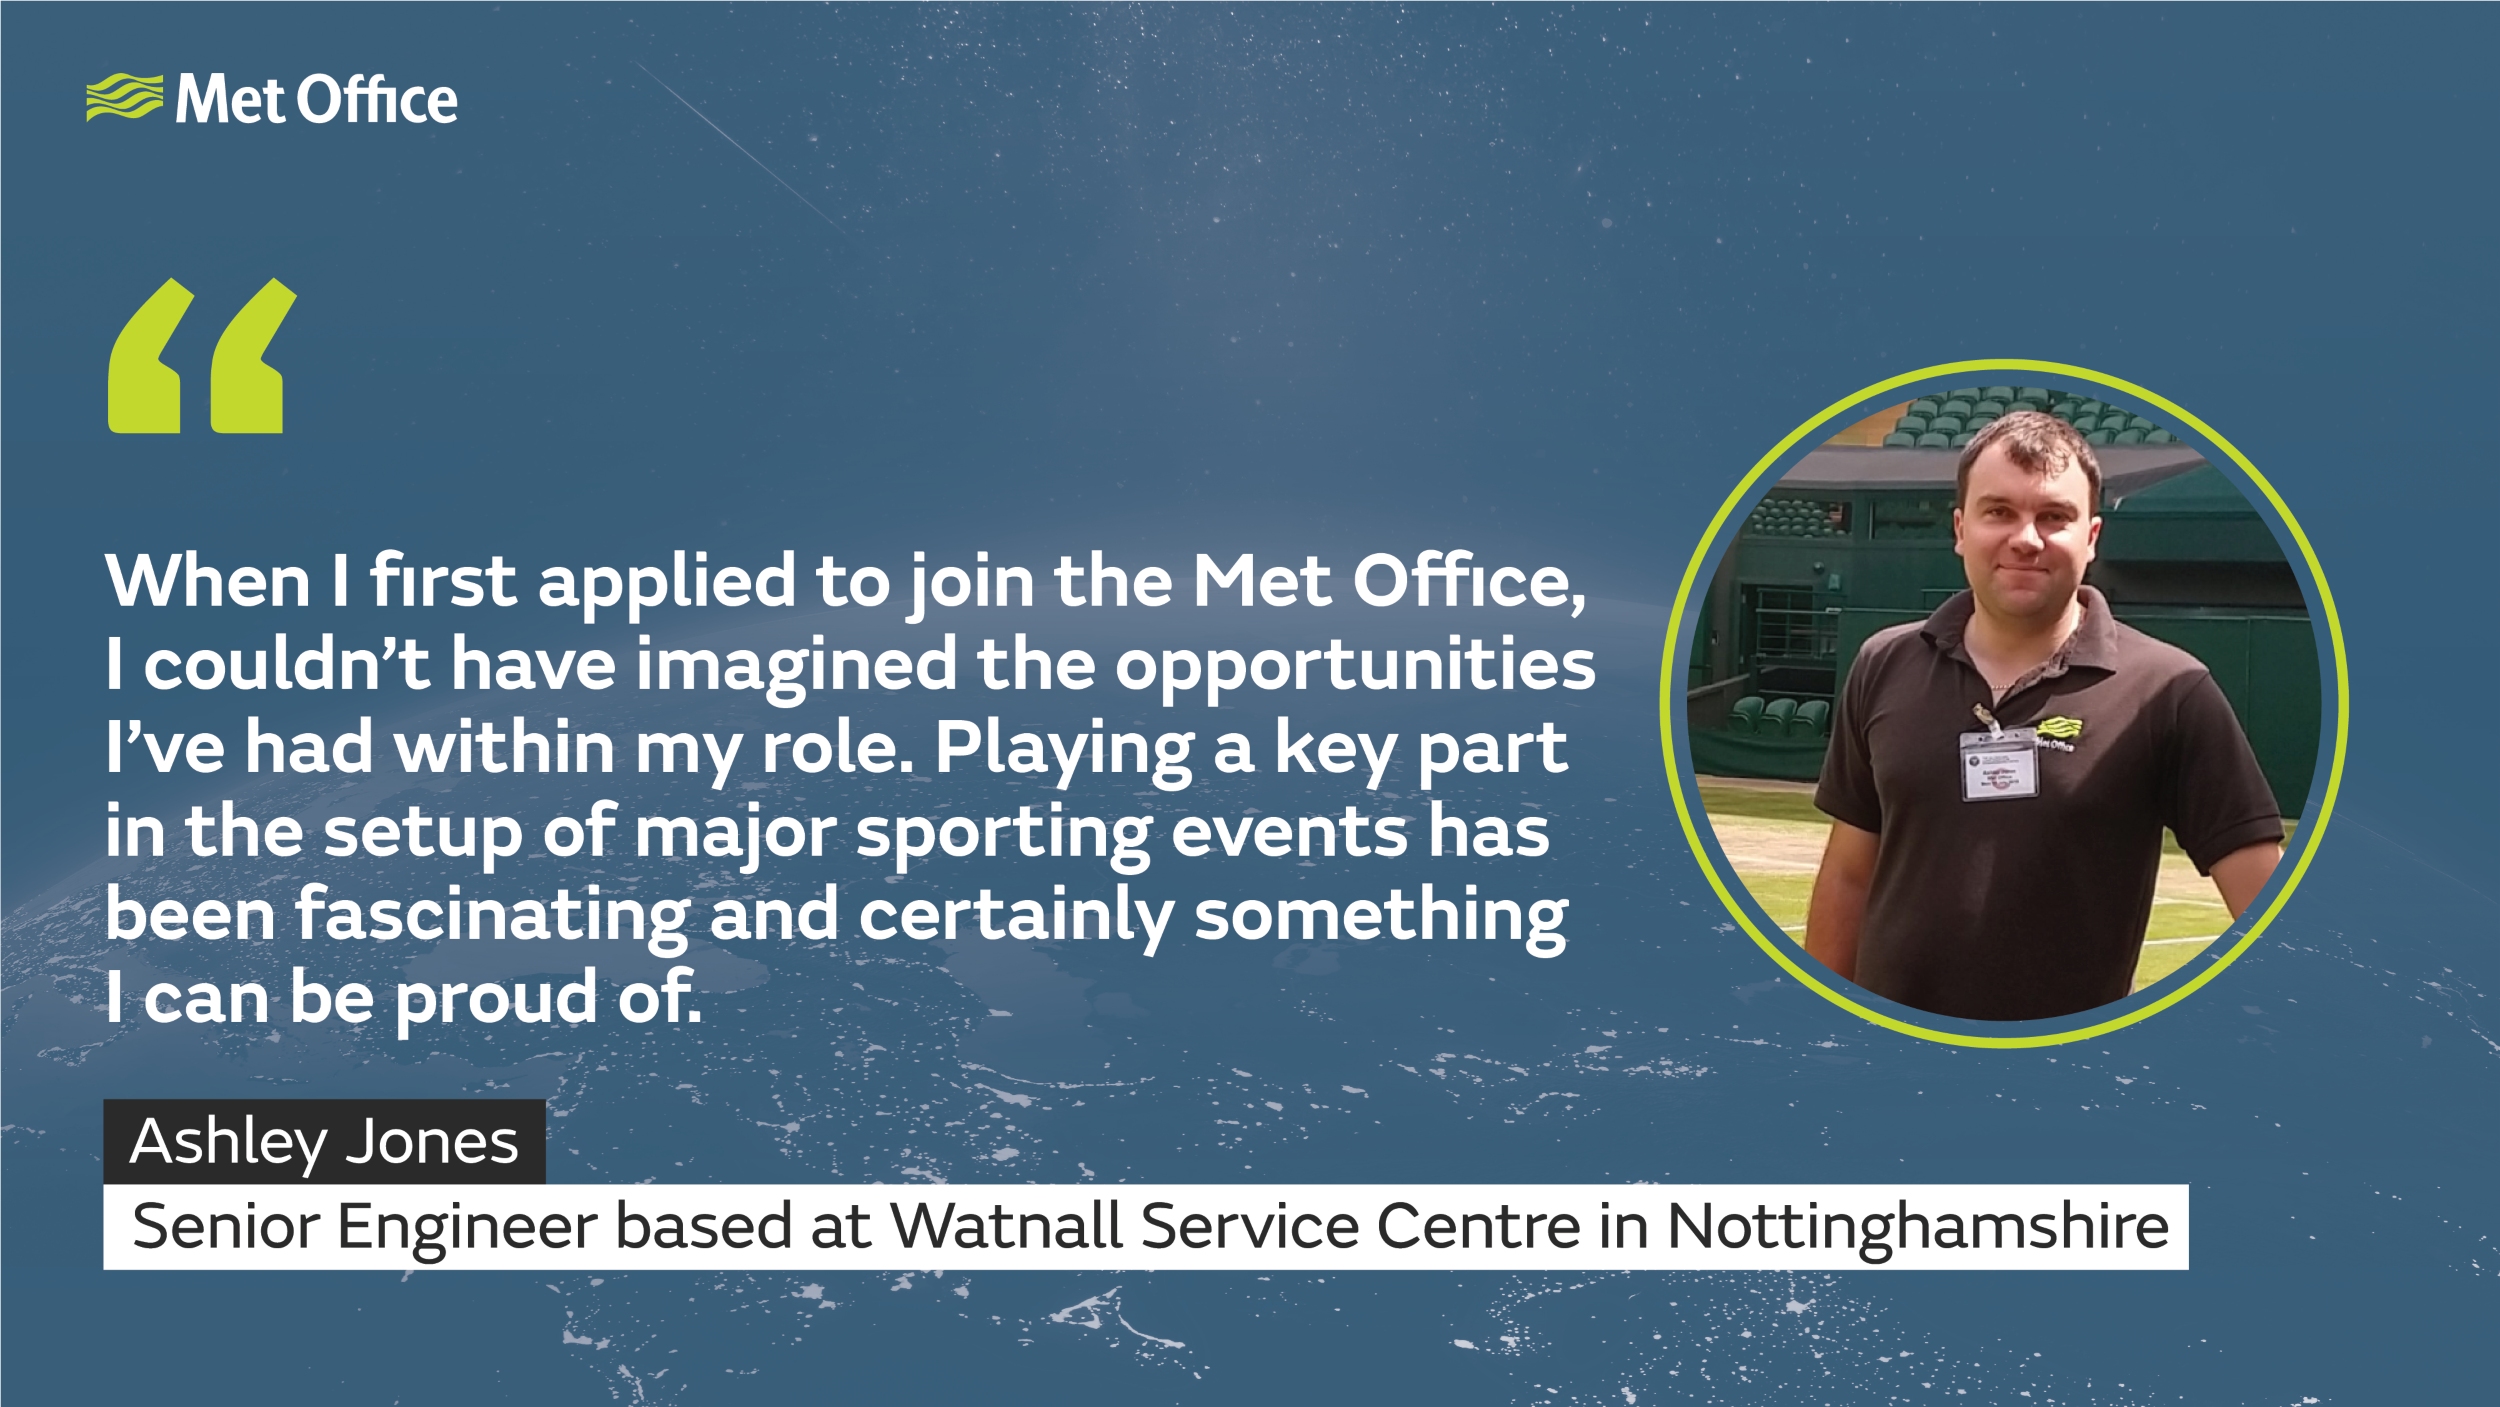 Quote graphic for Ashley Jones Met Office Senior Engineer. Ashley talks about fascinating opportunities to work at major sporting events within his role.